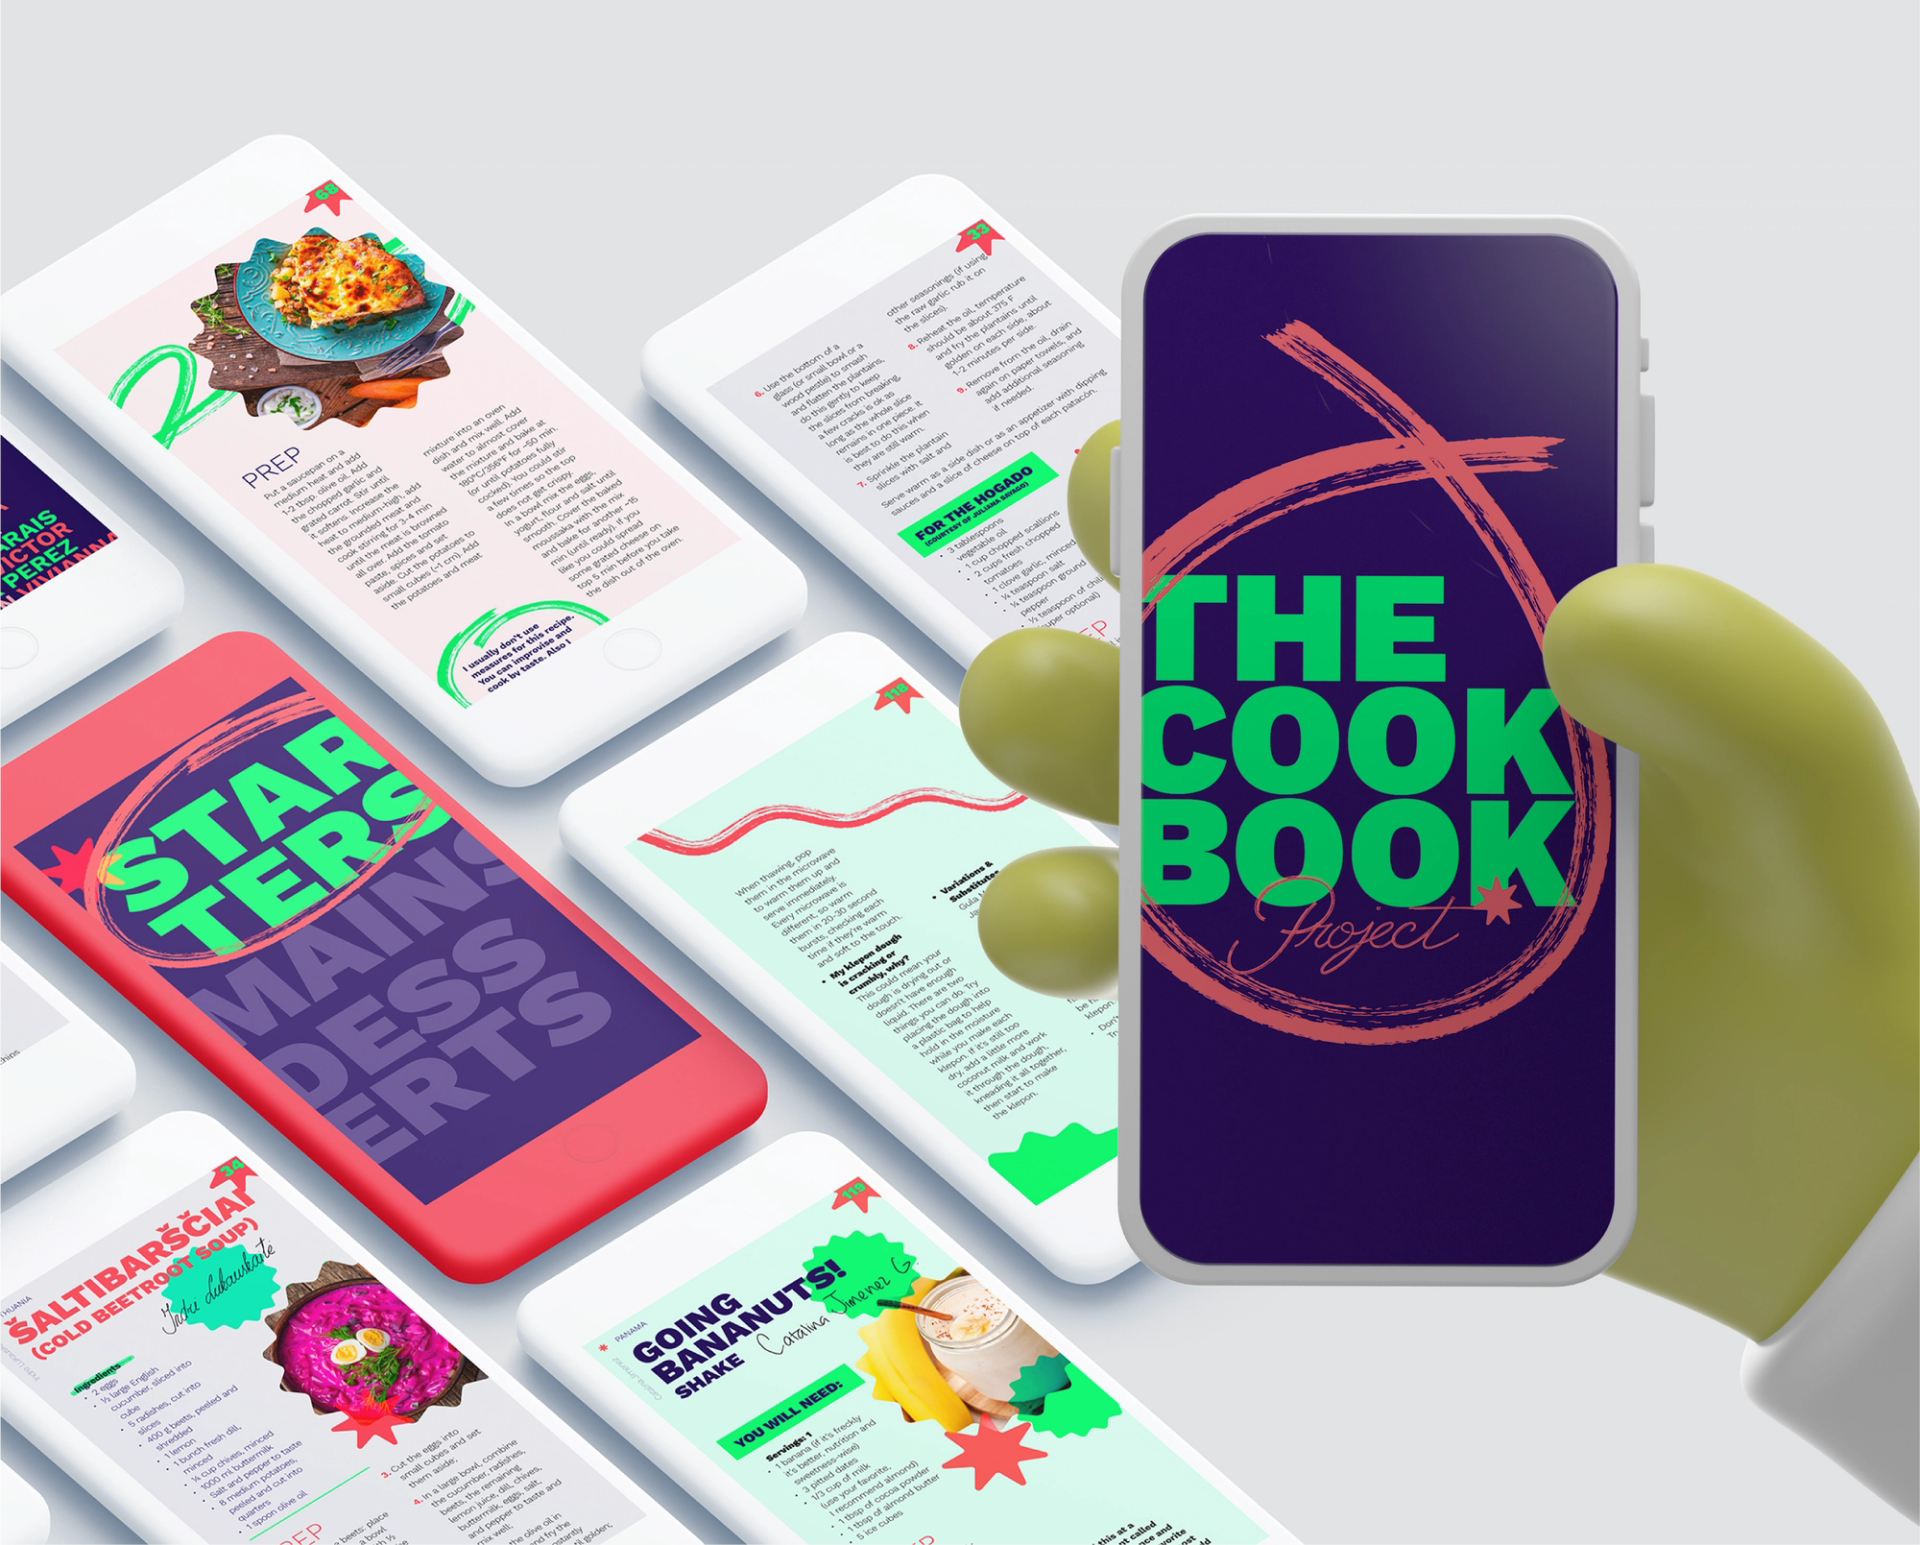 The Cookbook Project